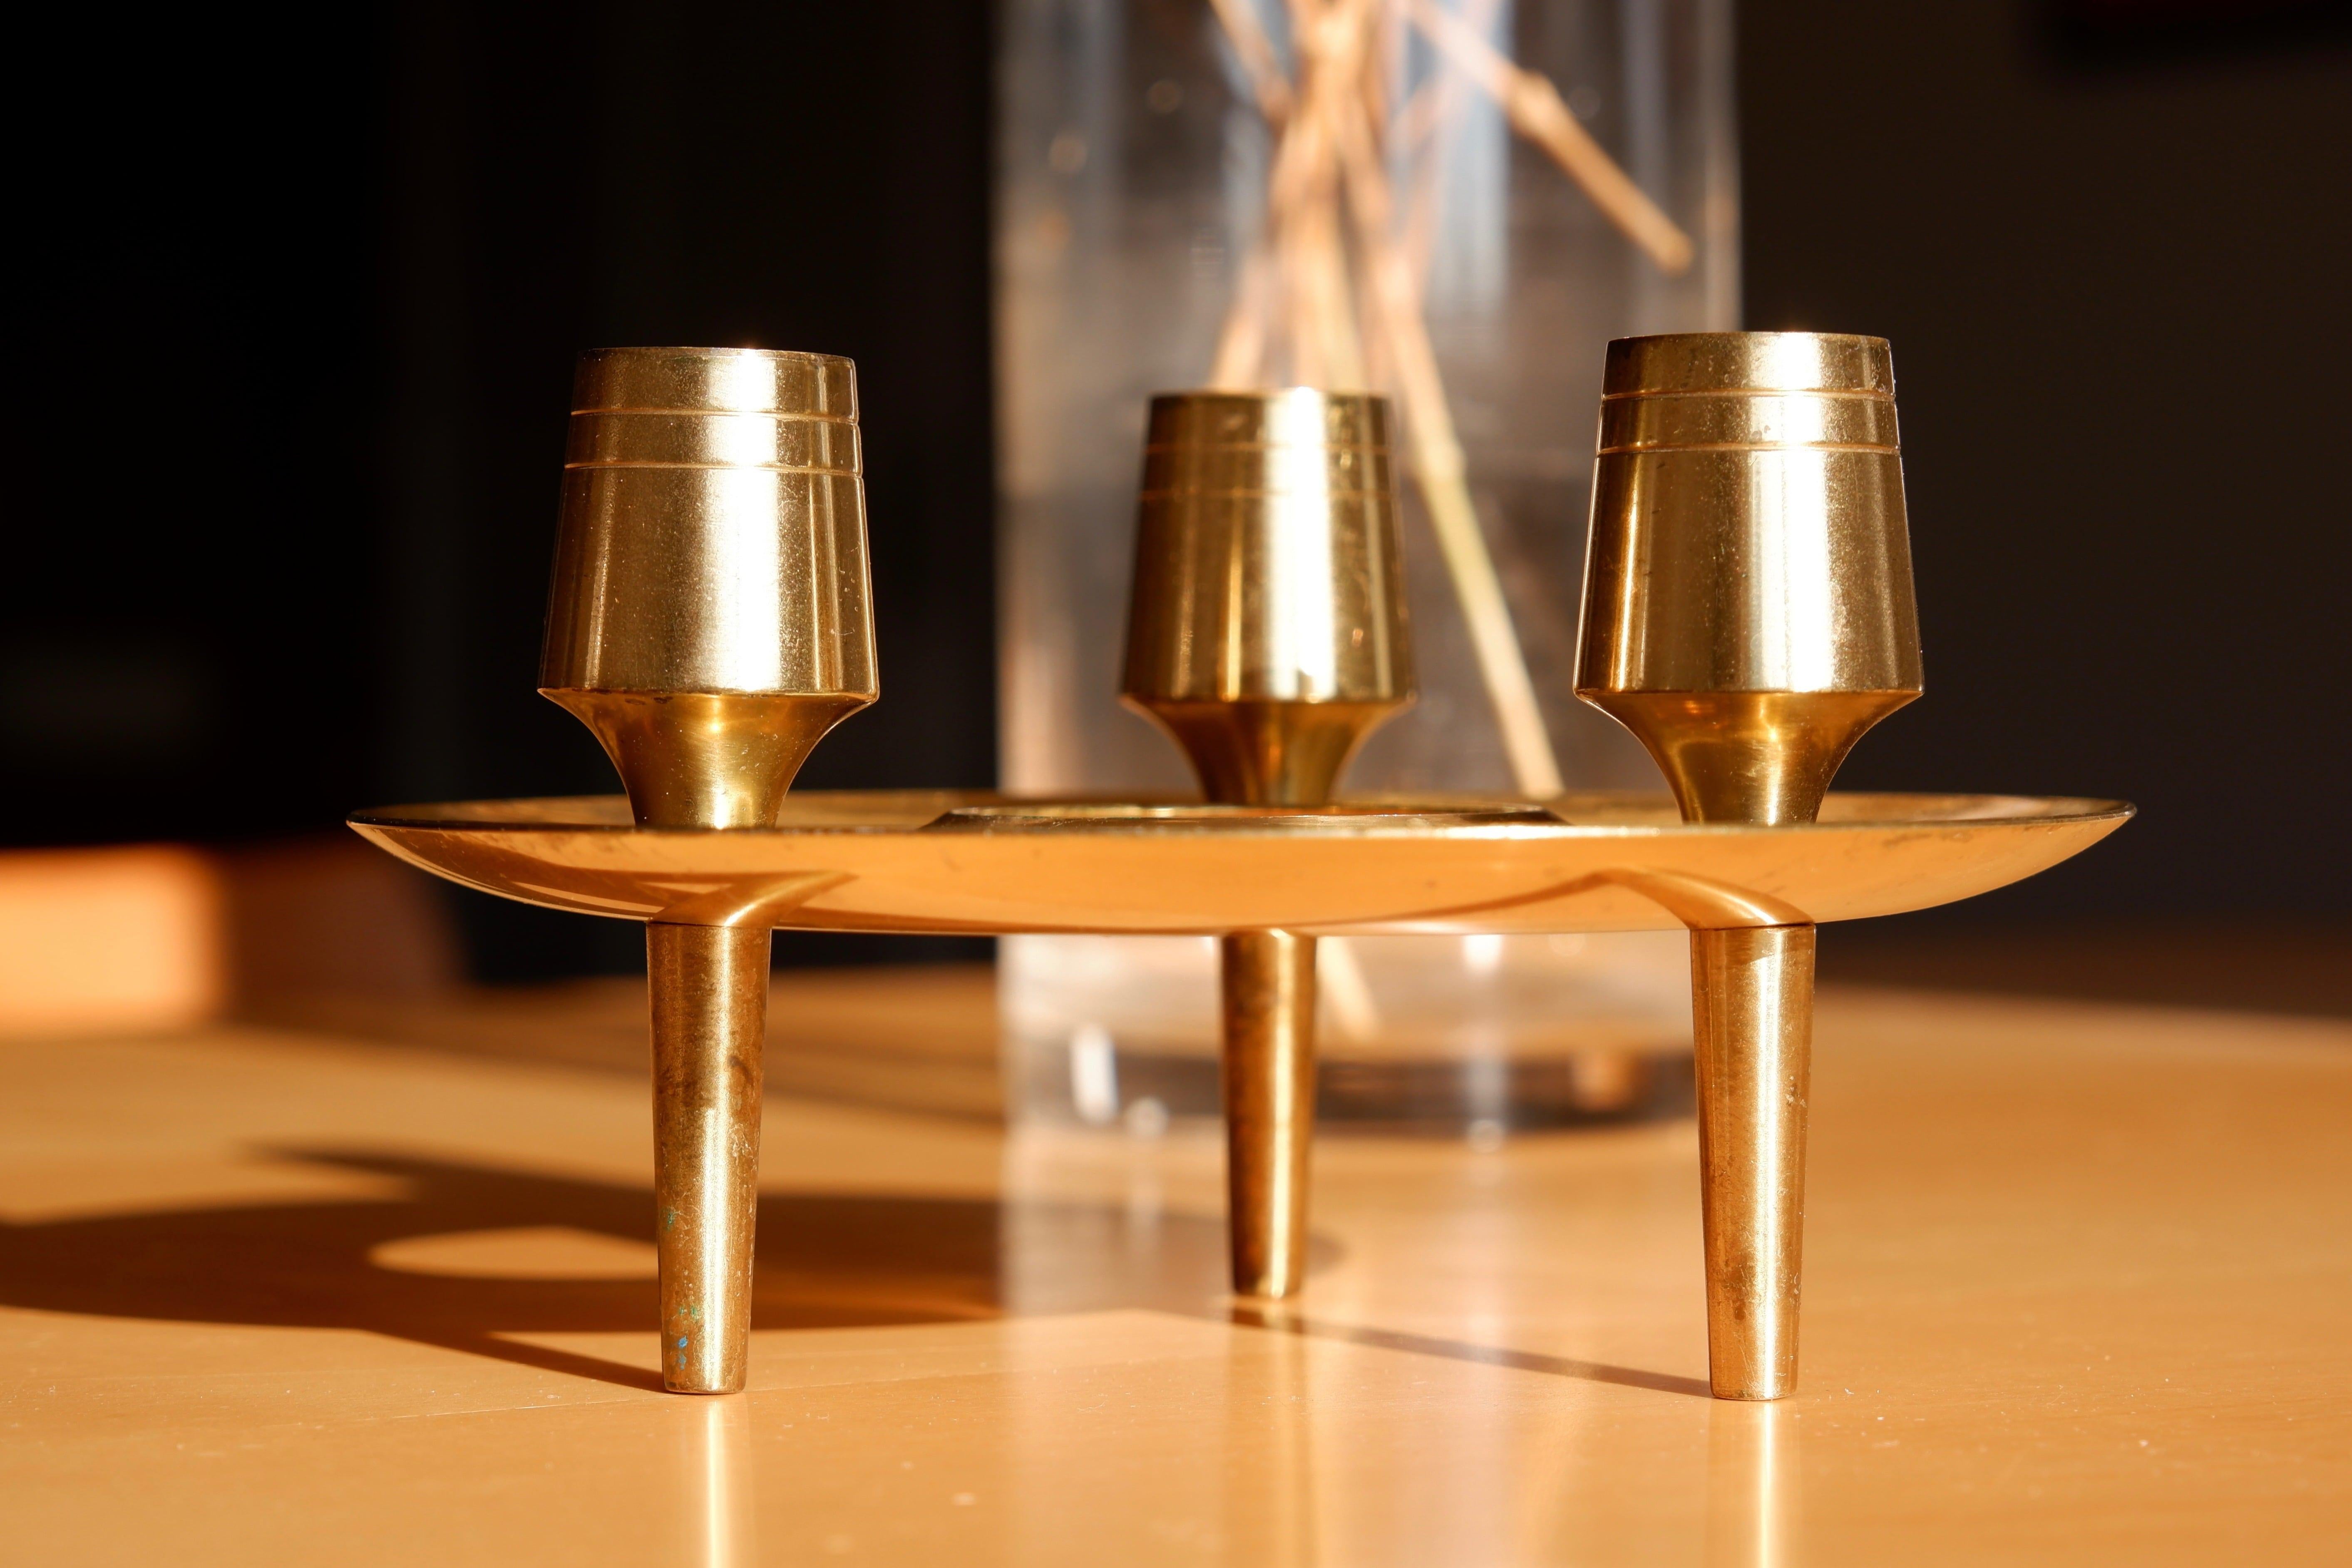 Paavo Tynell Brass Candle Holders for Taito In Good Condition For Sale In Hägersten-Liljeholmen, Stockholms län